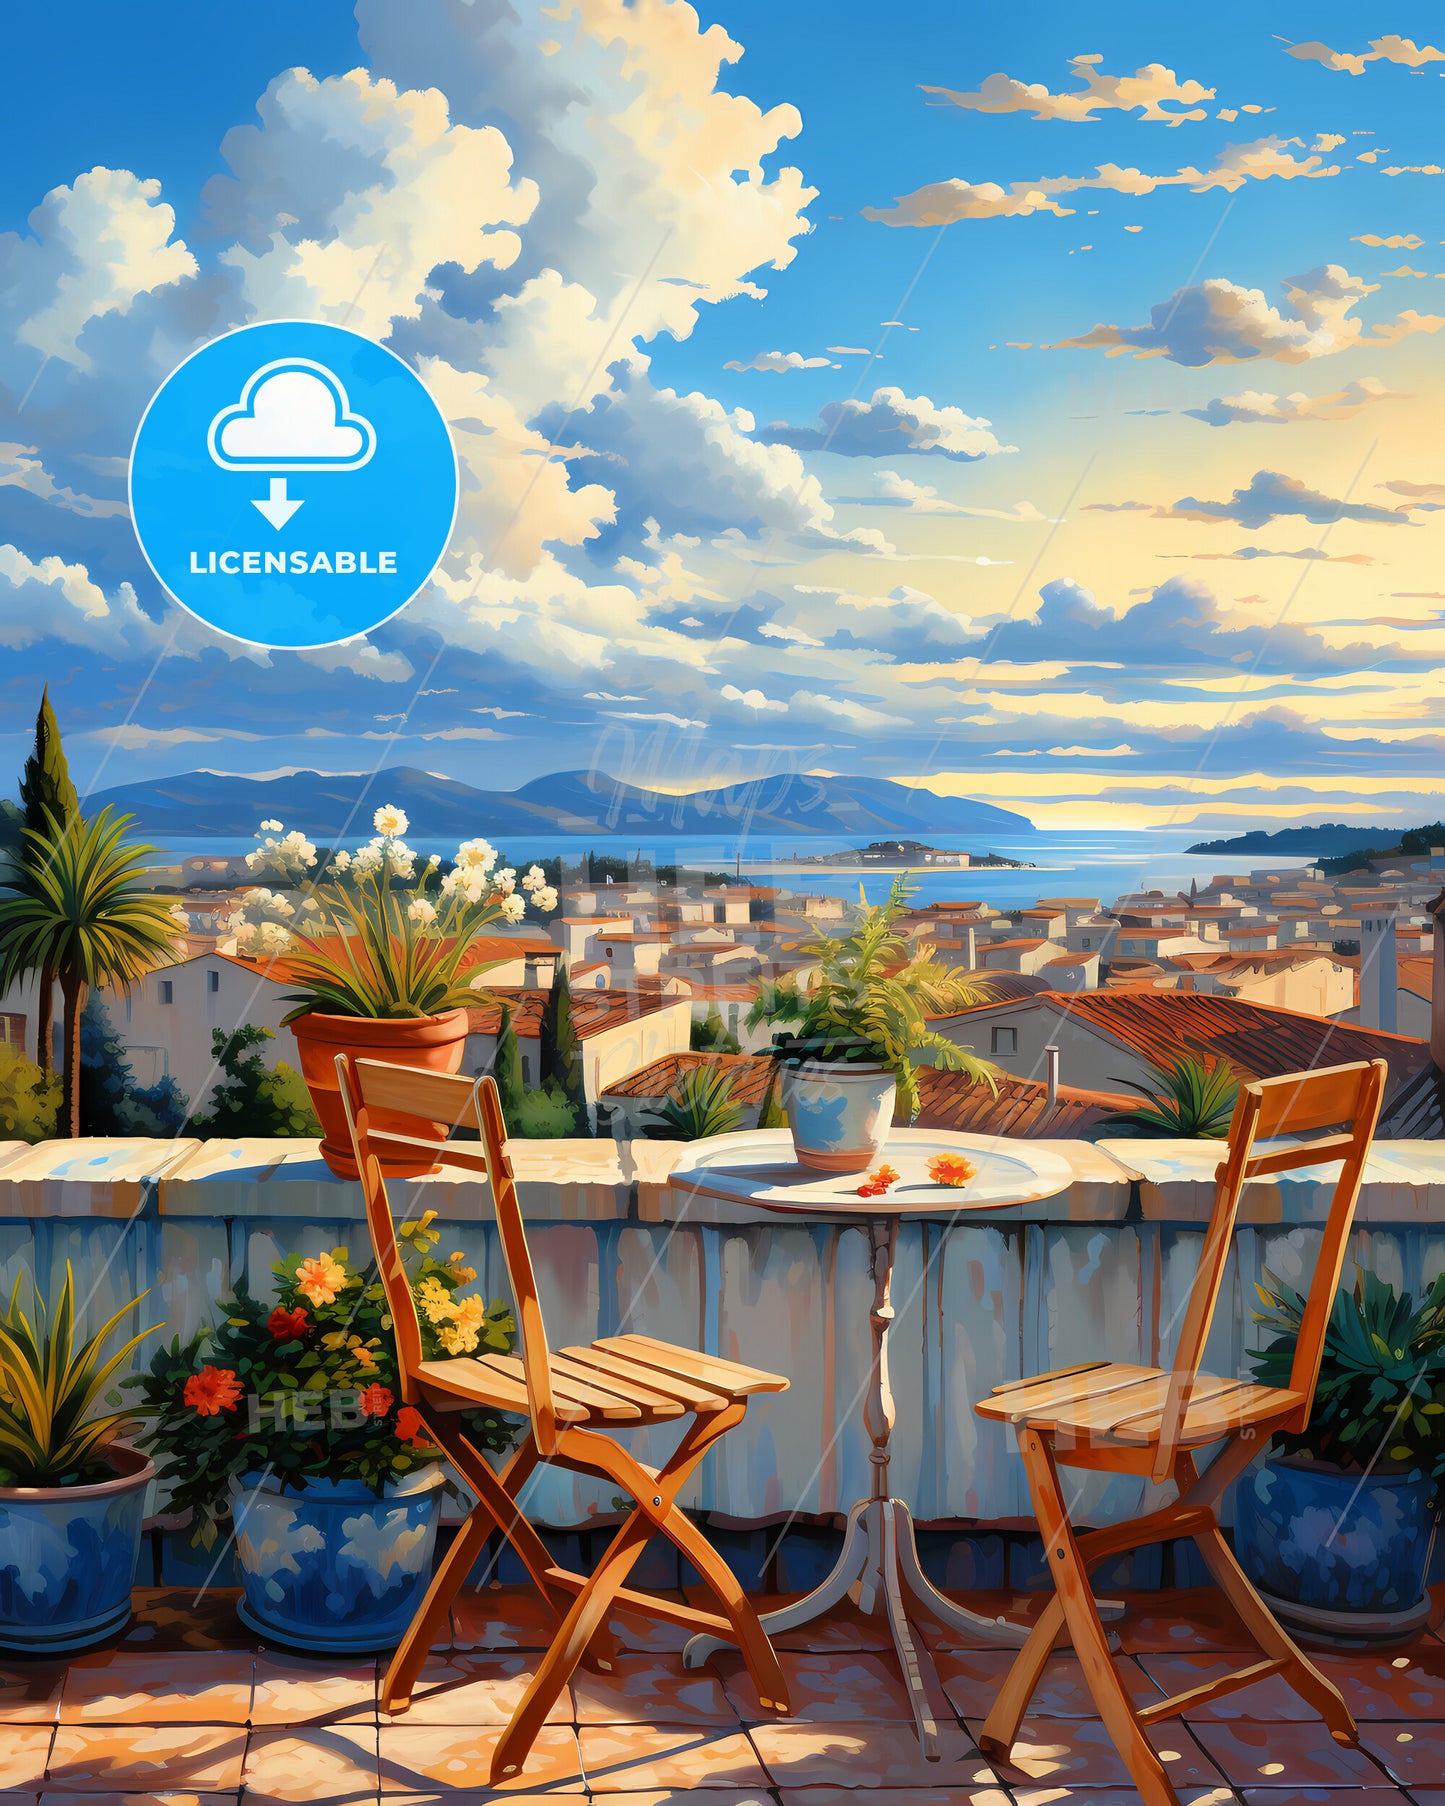 On The Roofs Of Cannes, France - A Table And Chairs On A Balcony Overlooking A City